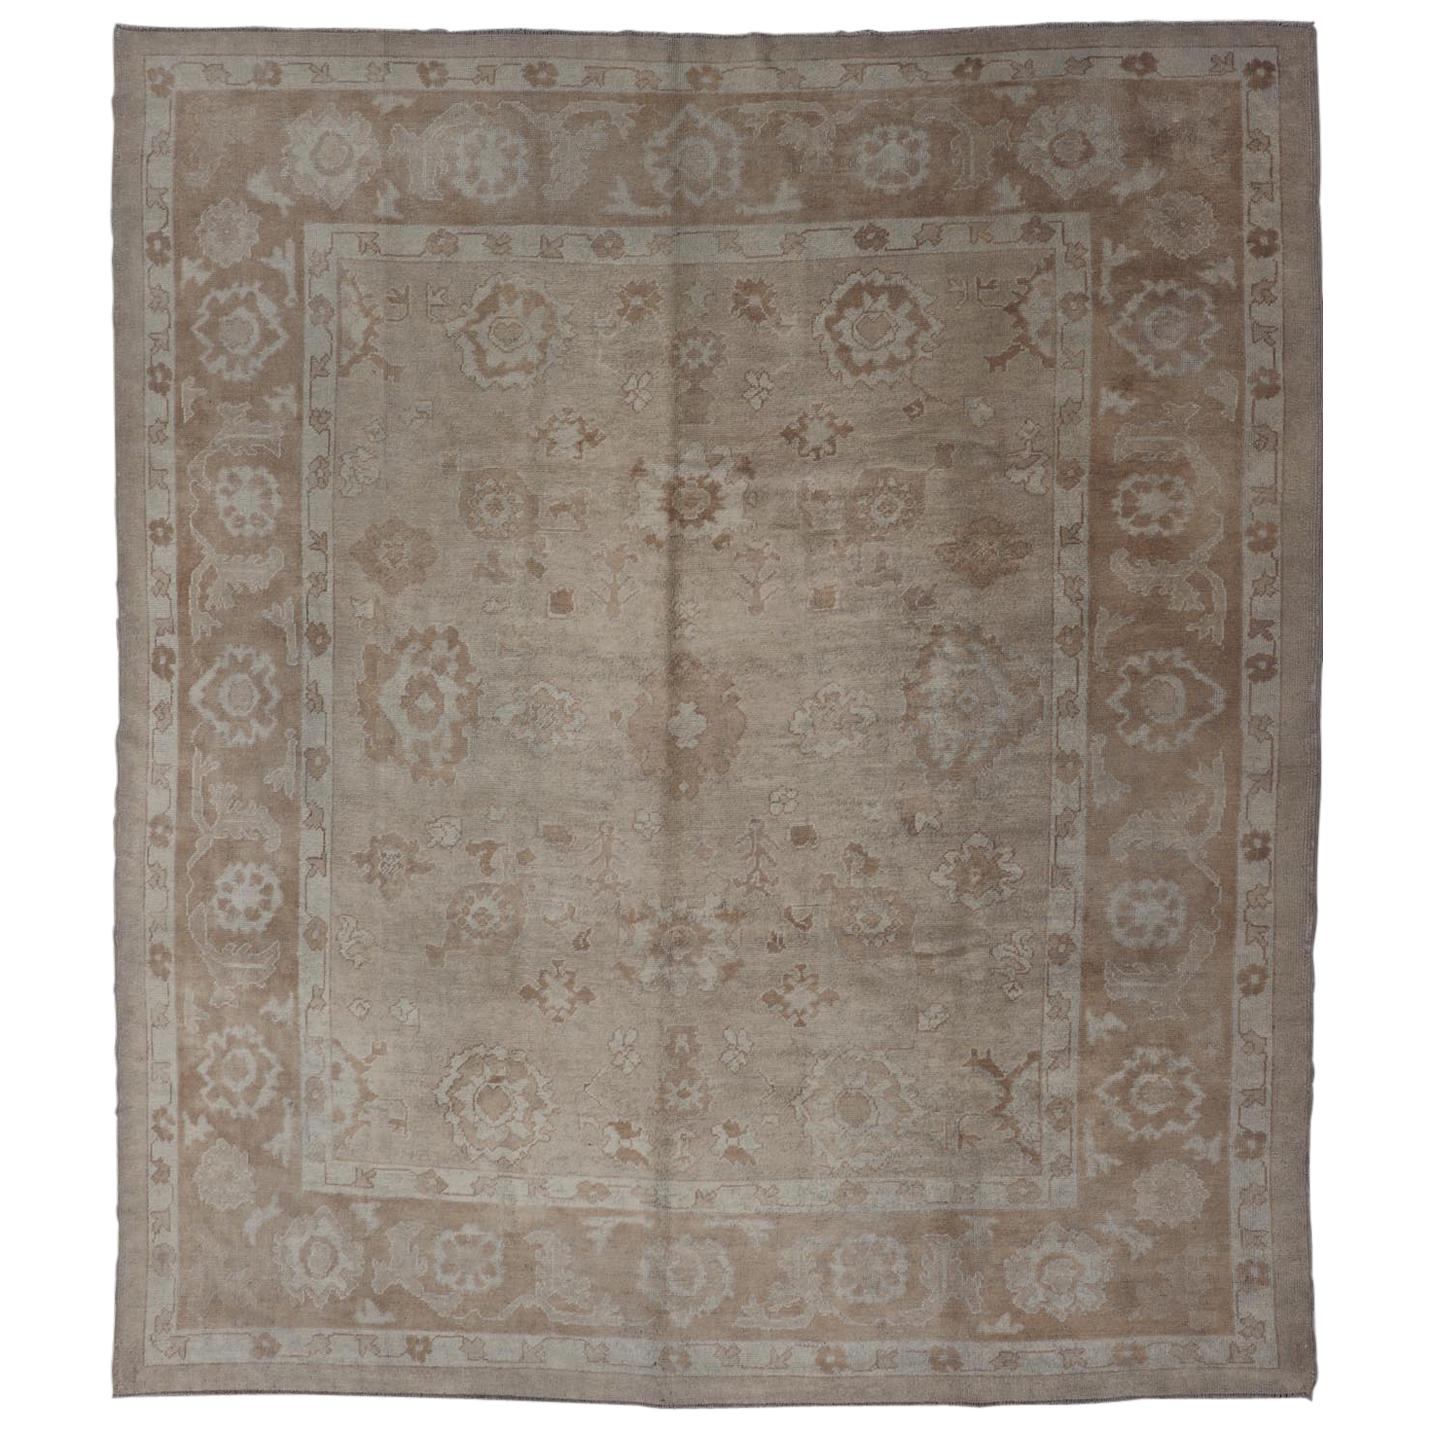 Neutral Colors Vintage Angora Oushak Turkish Rug in Light Brown and Cream